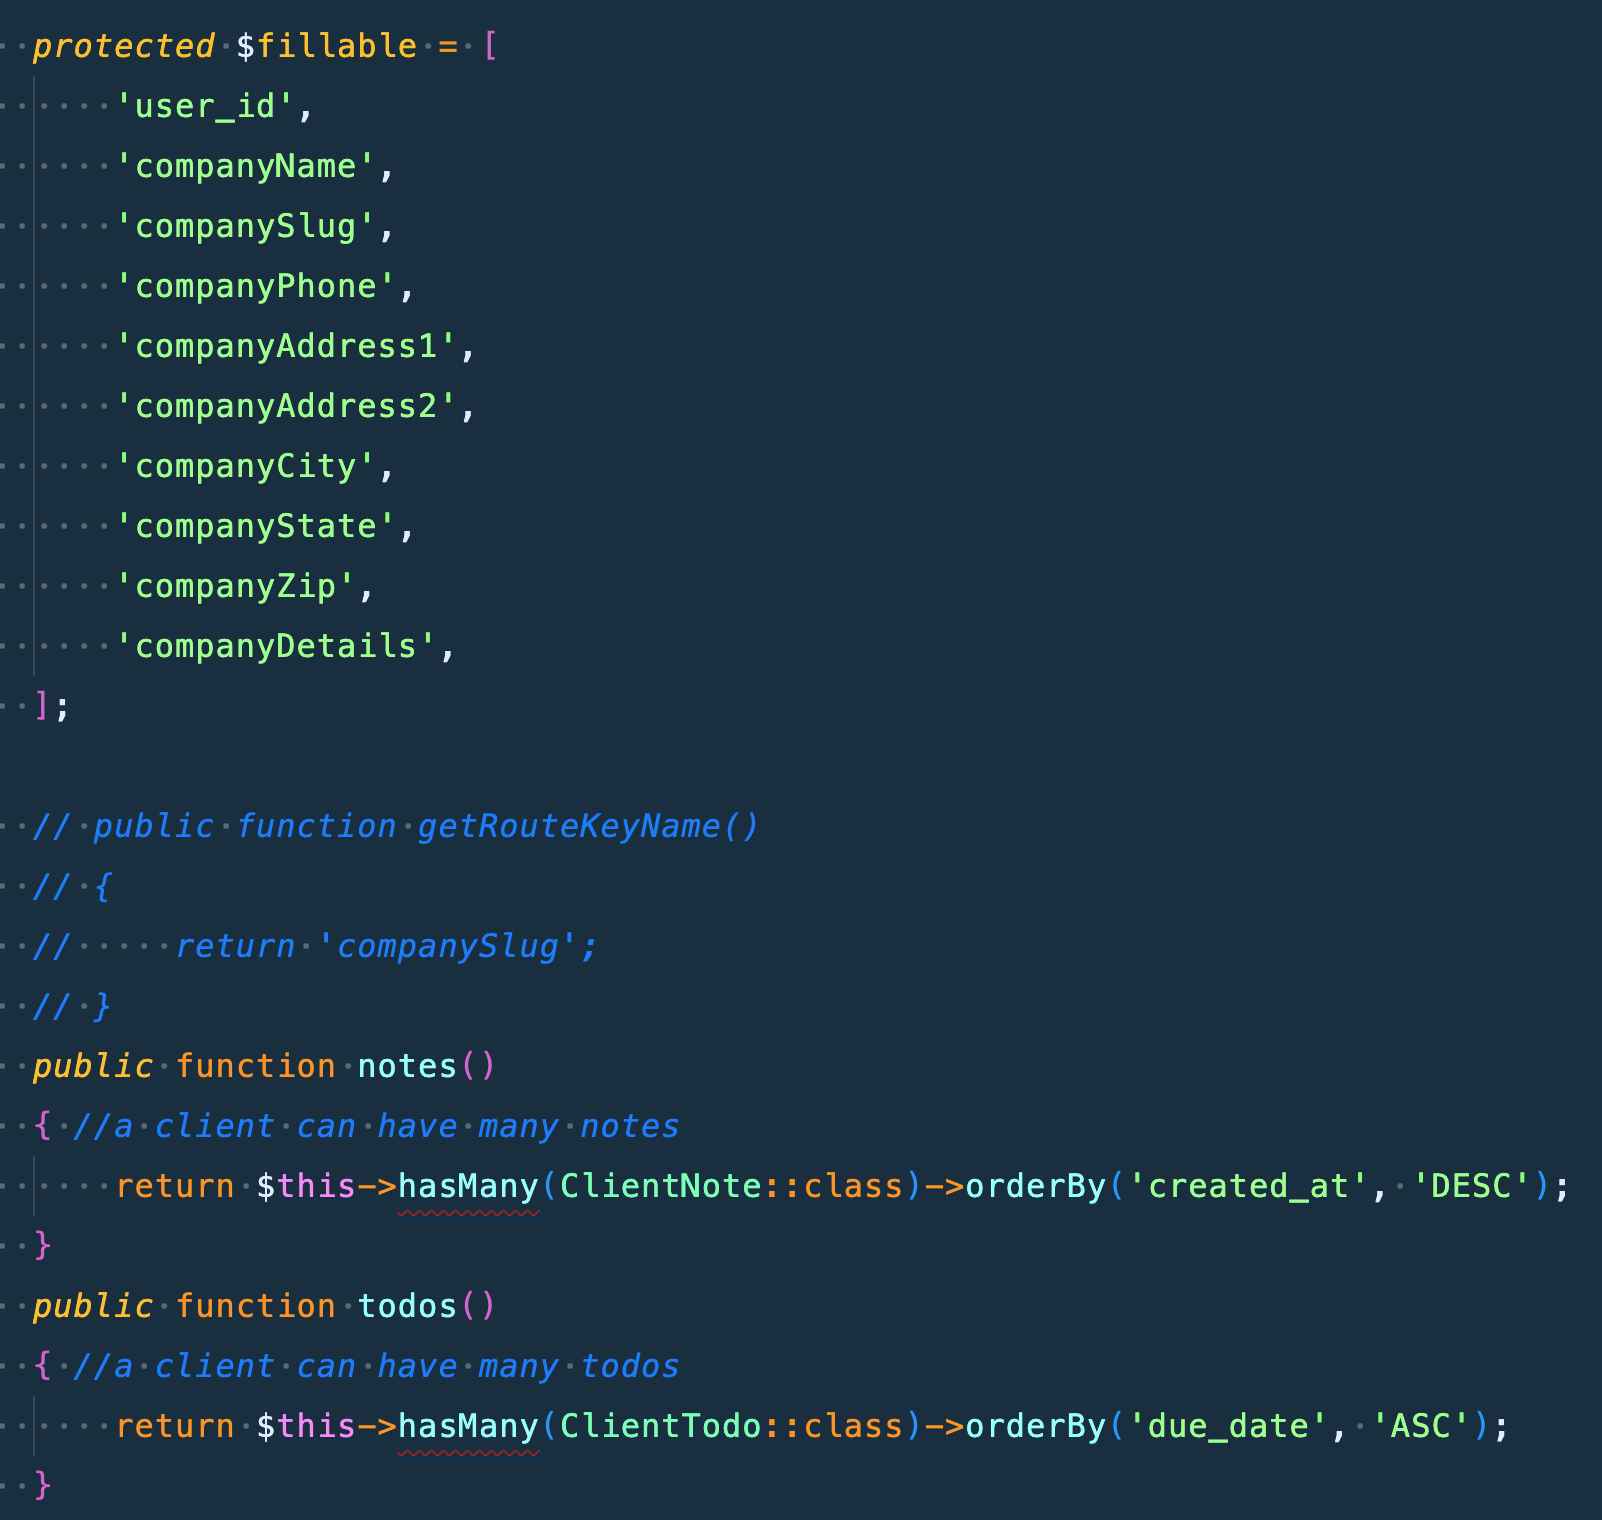 A screenshot of php code defining what a Client is.